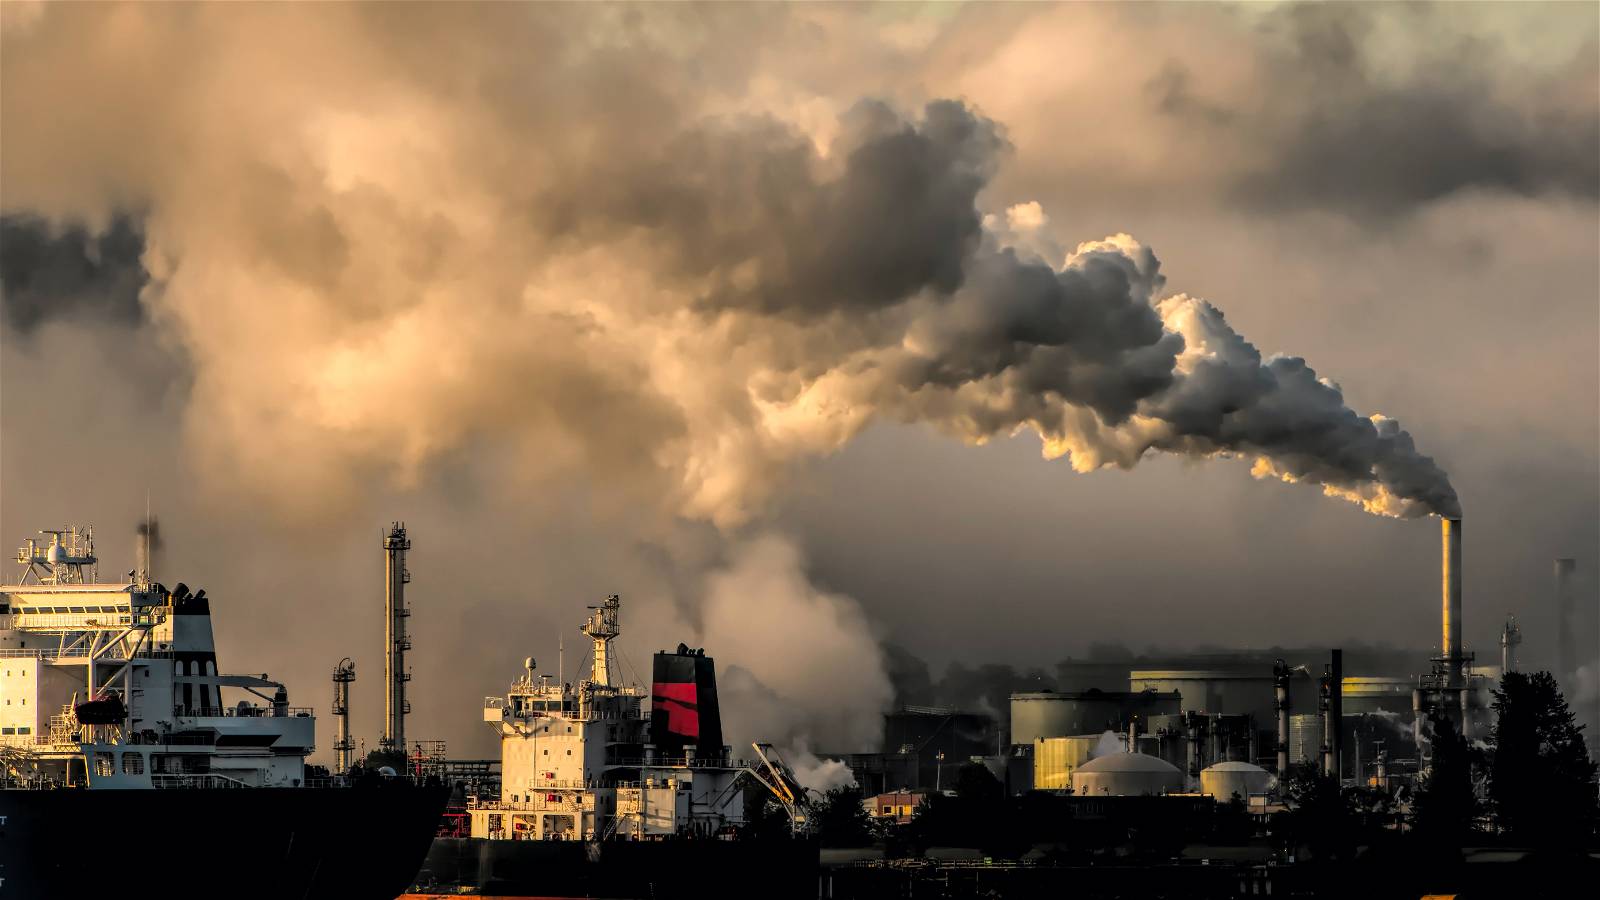 A carbon tax on investment income could be more fair and make it less profitable to pollute – a new analysis shows why 